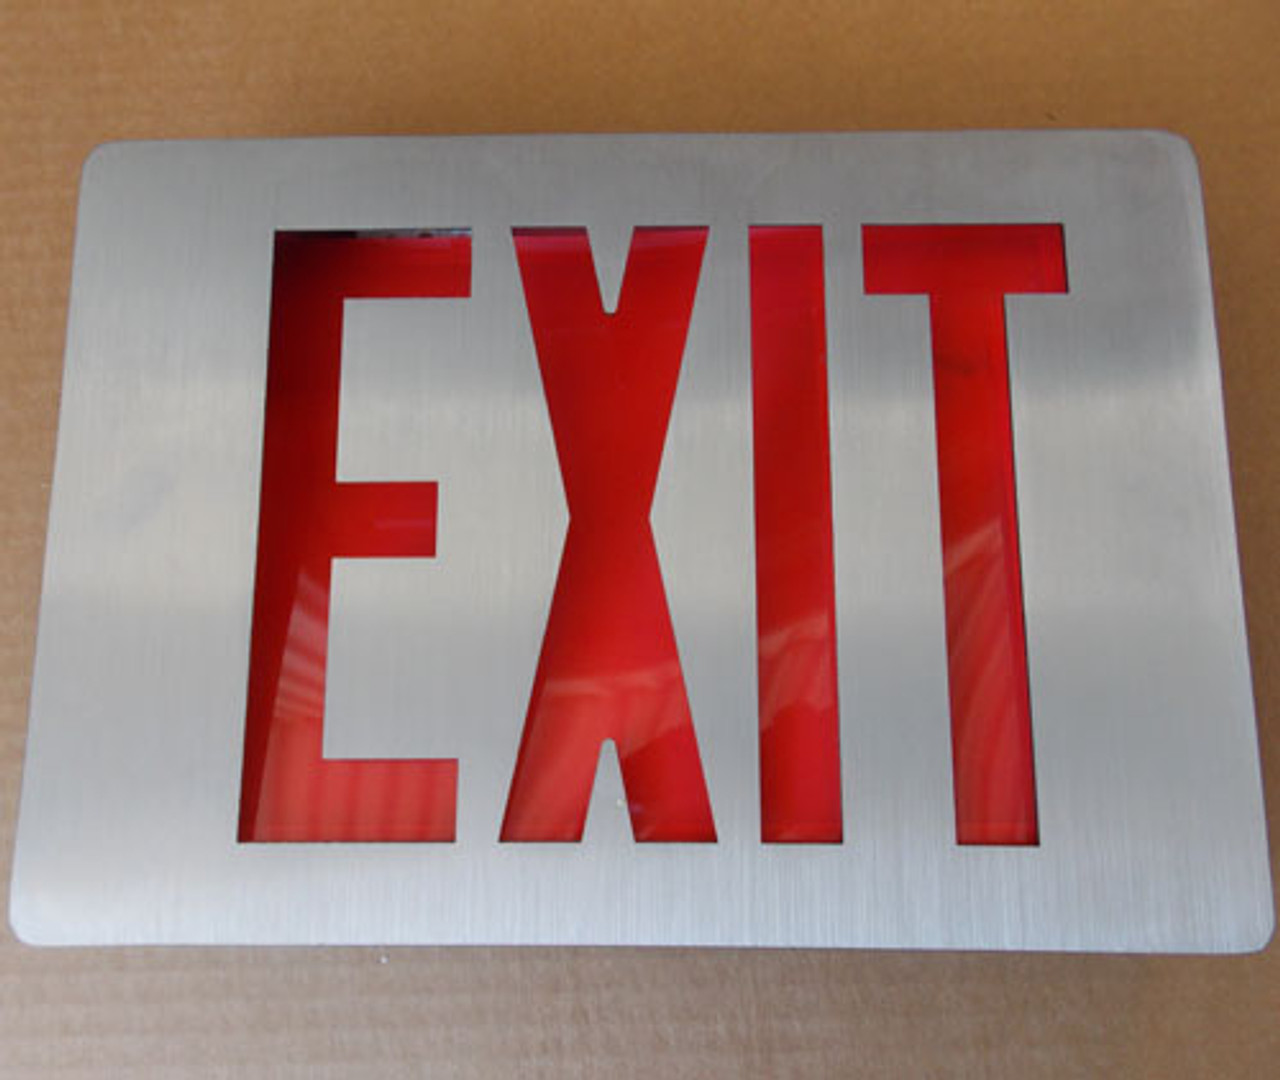  Lithonia Lighting Extreme LED Exit Sign LV S 2 R 120